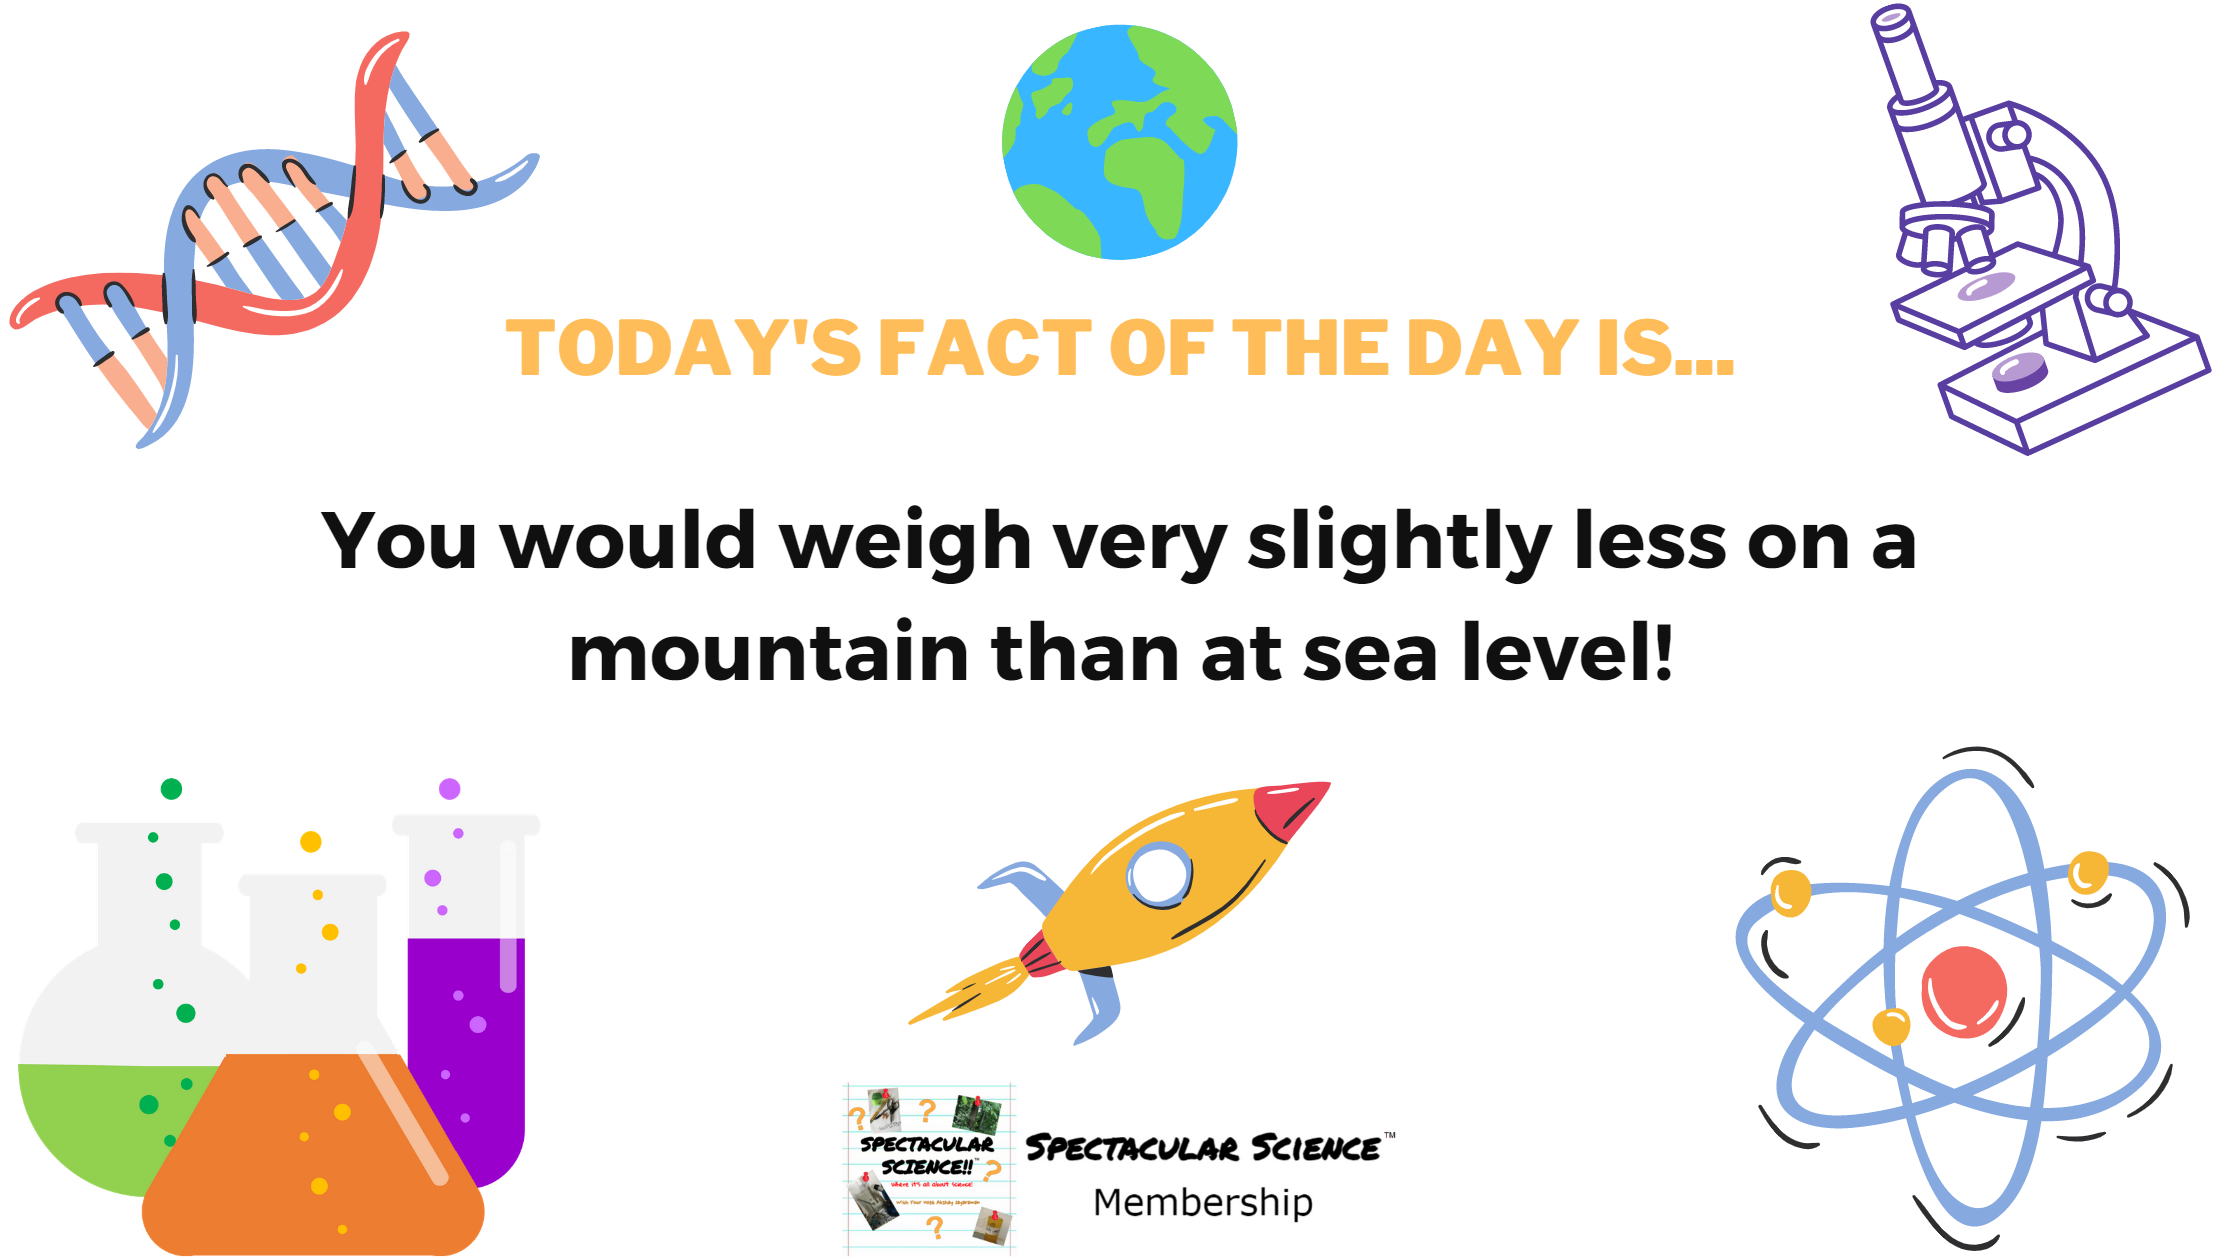 Fact of the Day Image May 18